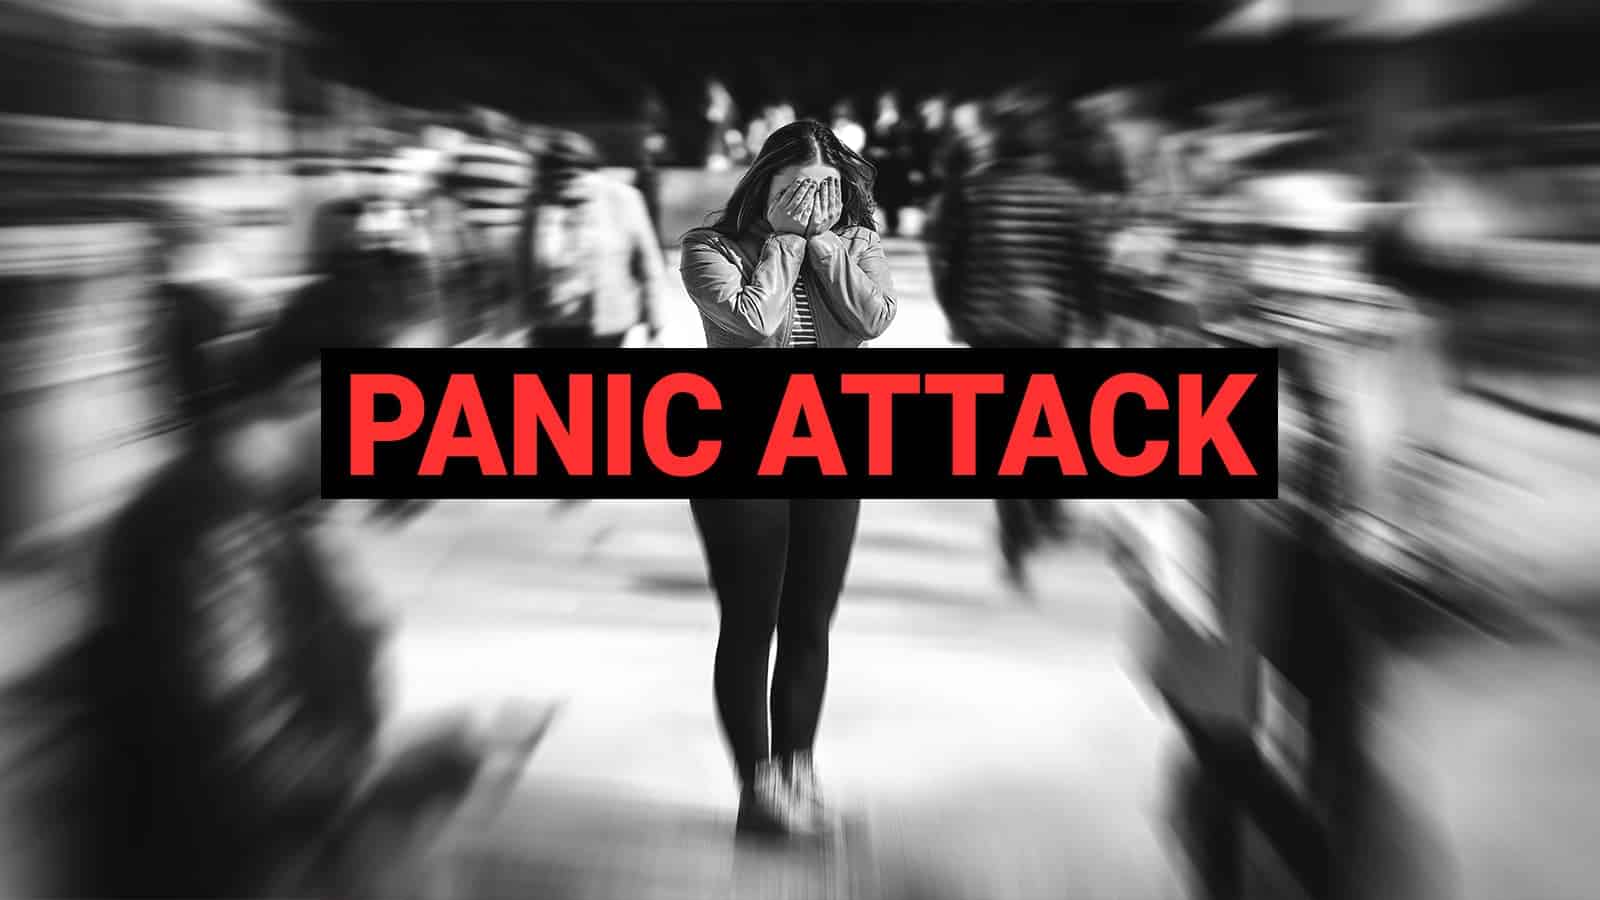 Want to prevent Panic Attacks? — Follow these steps!